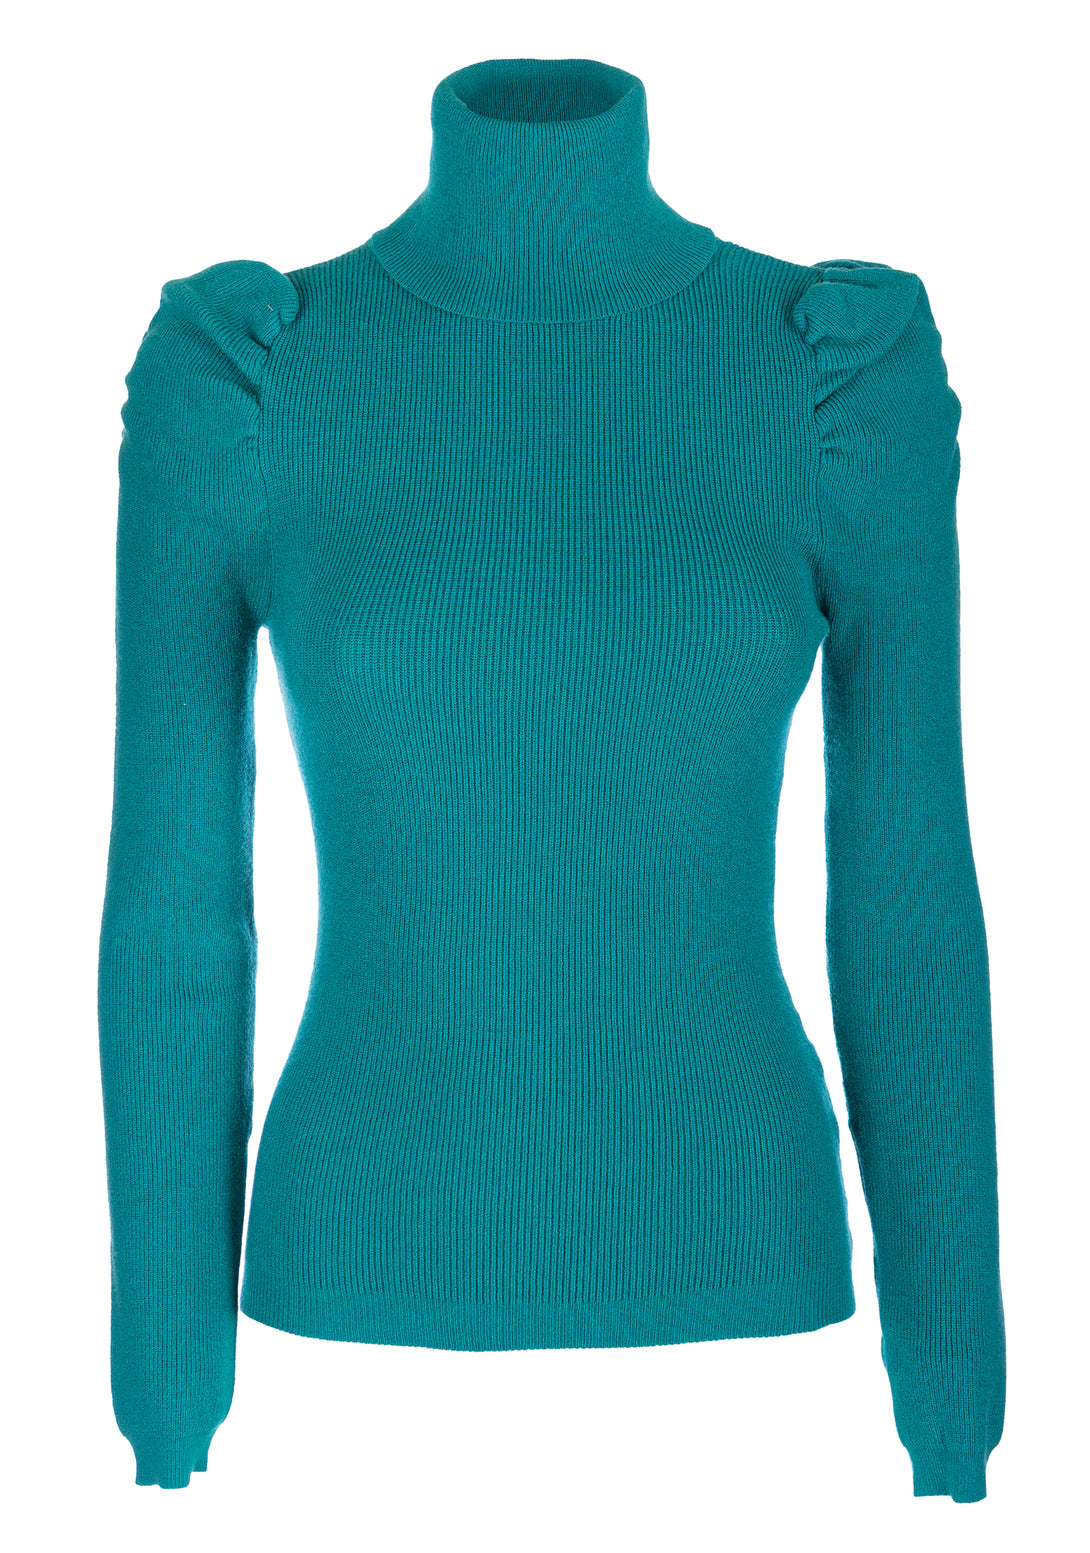 Knitwear slim fit with ribs and high neck Fracomina FI22WT7006K51301-436